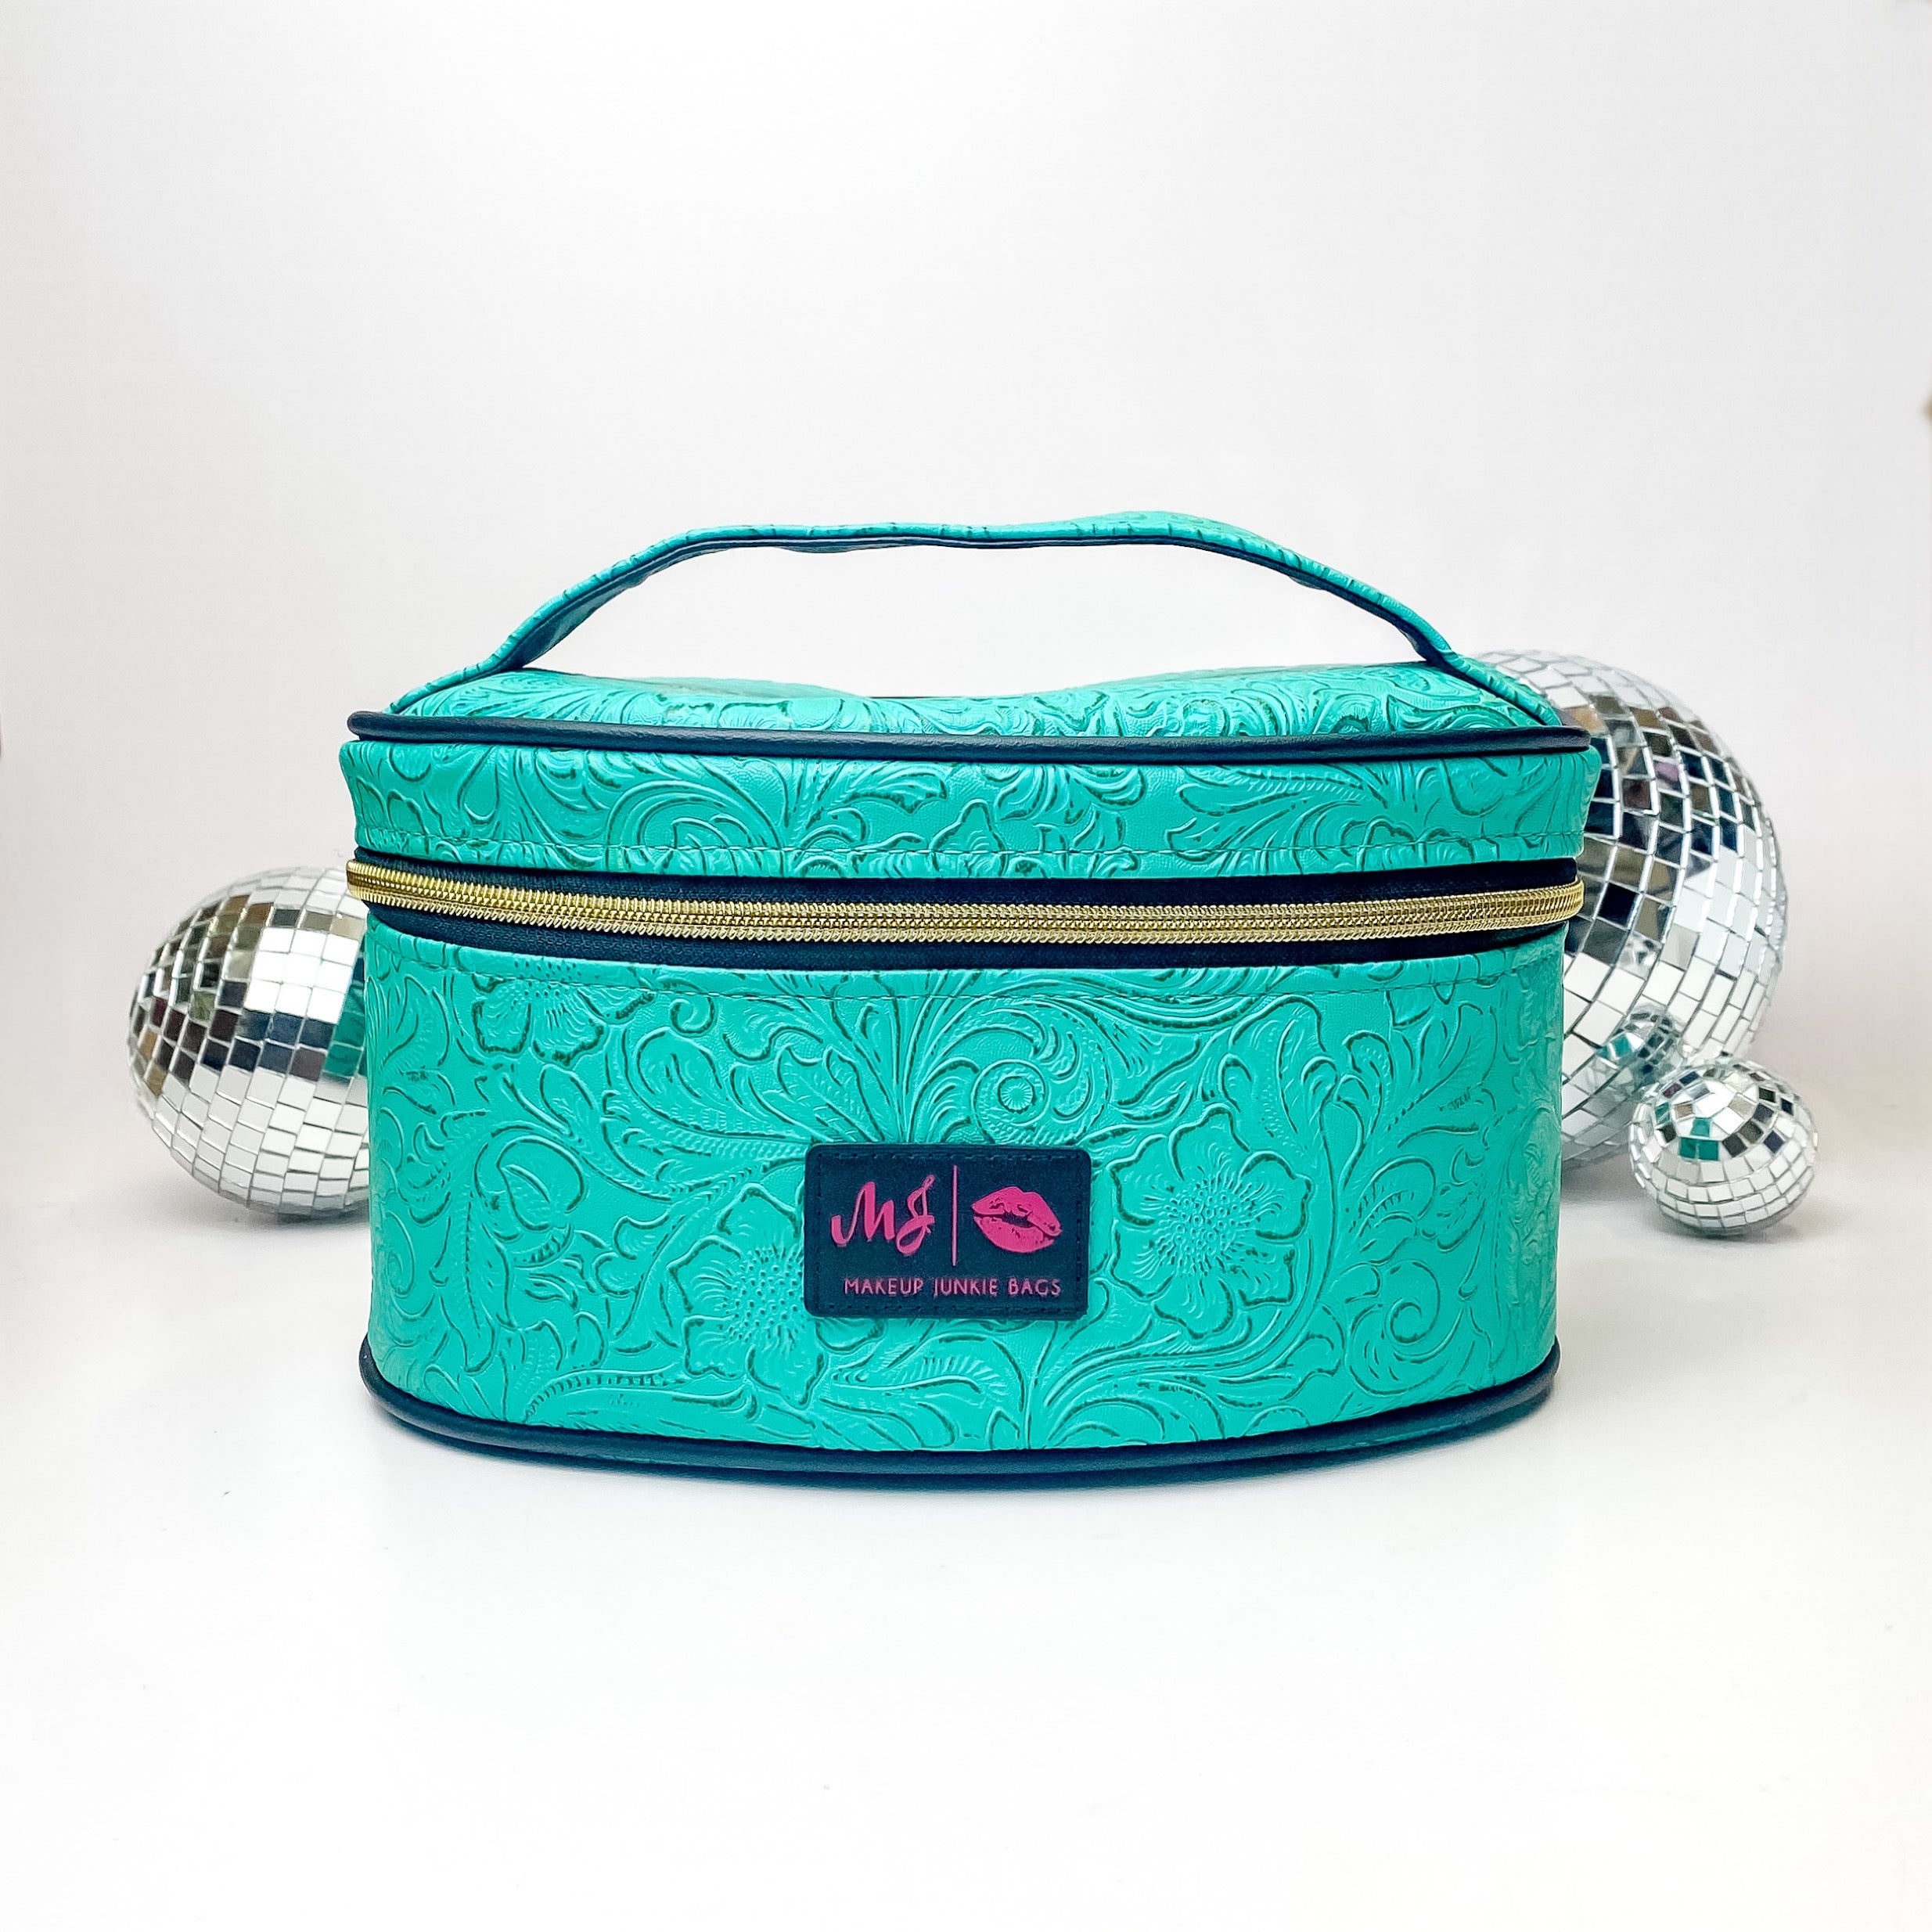 Pictured on a white background with disco balls in the background is a traincase with a top handle in a turquoise leather tooled print. This bag includes a middle zipper and a tassel.